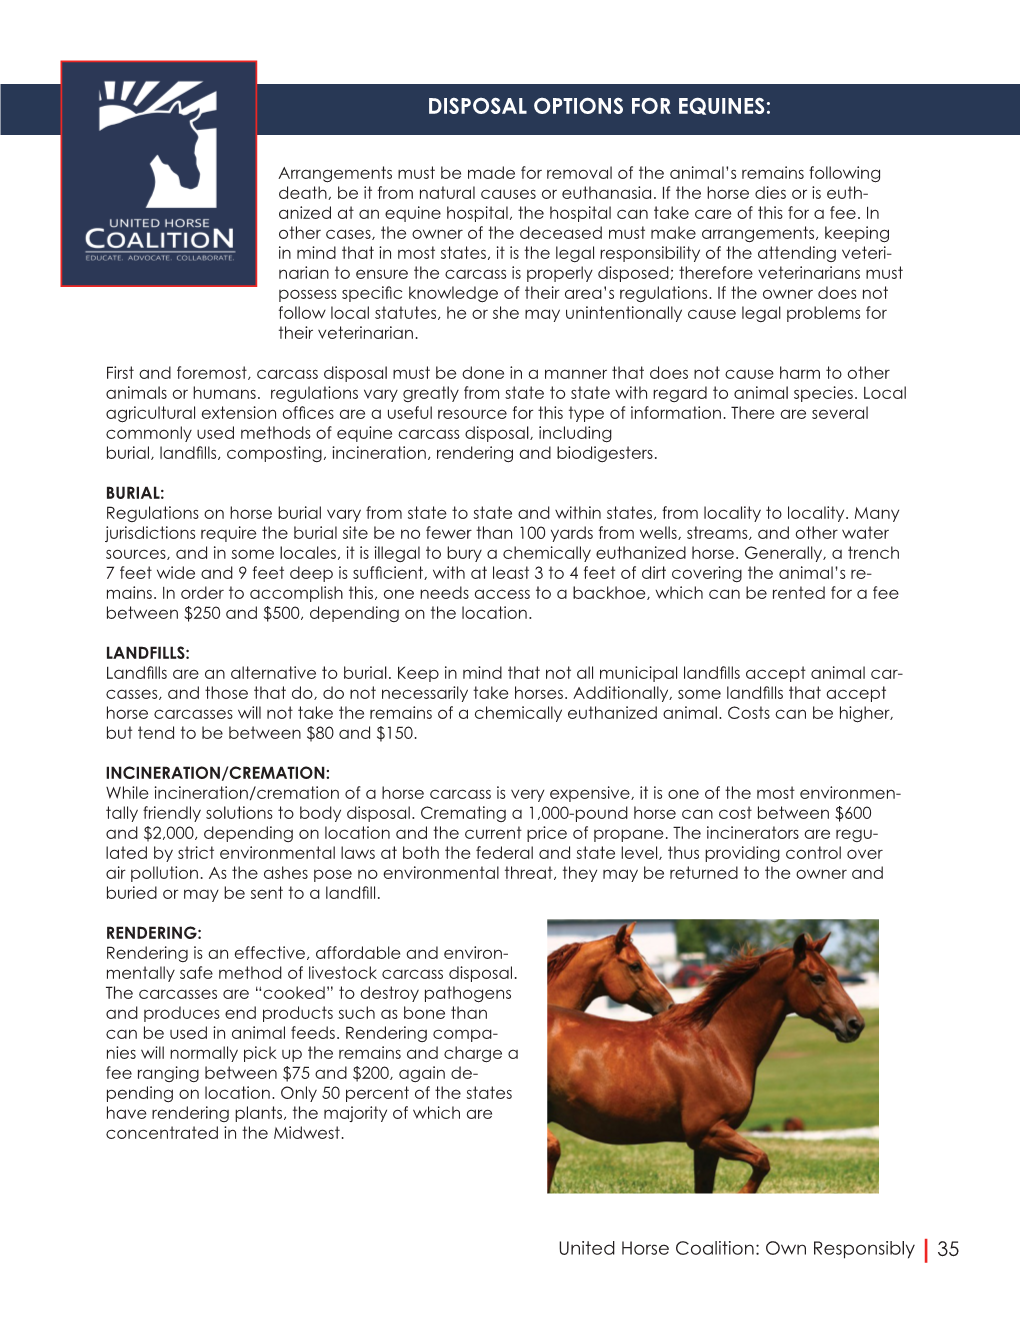 Disposal Options for Equines